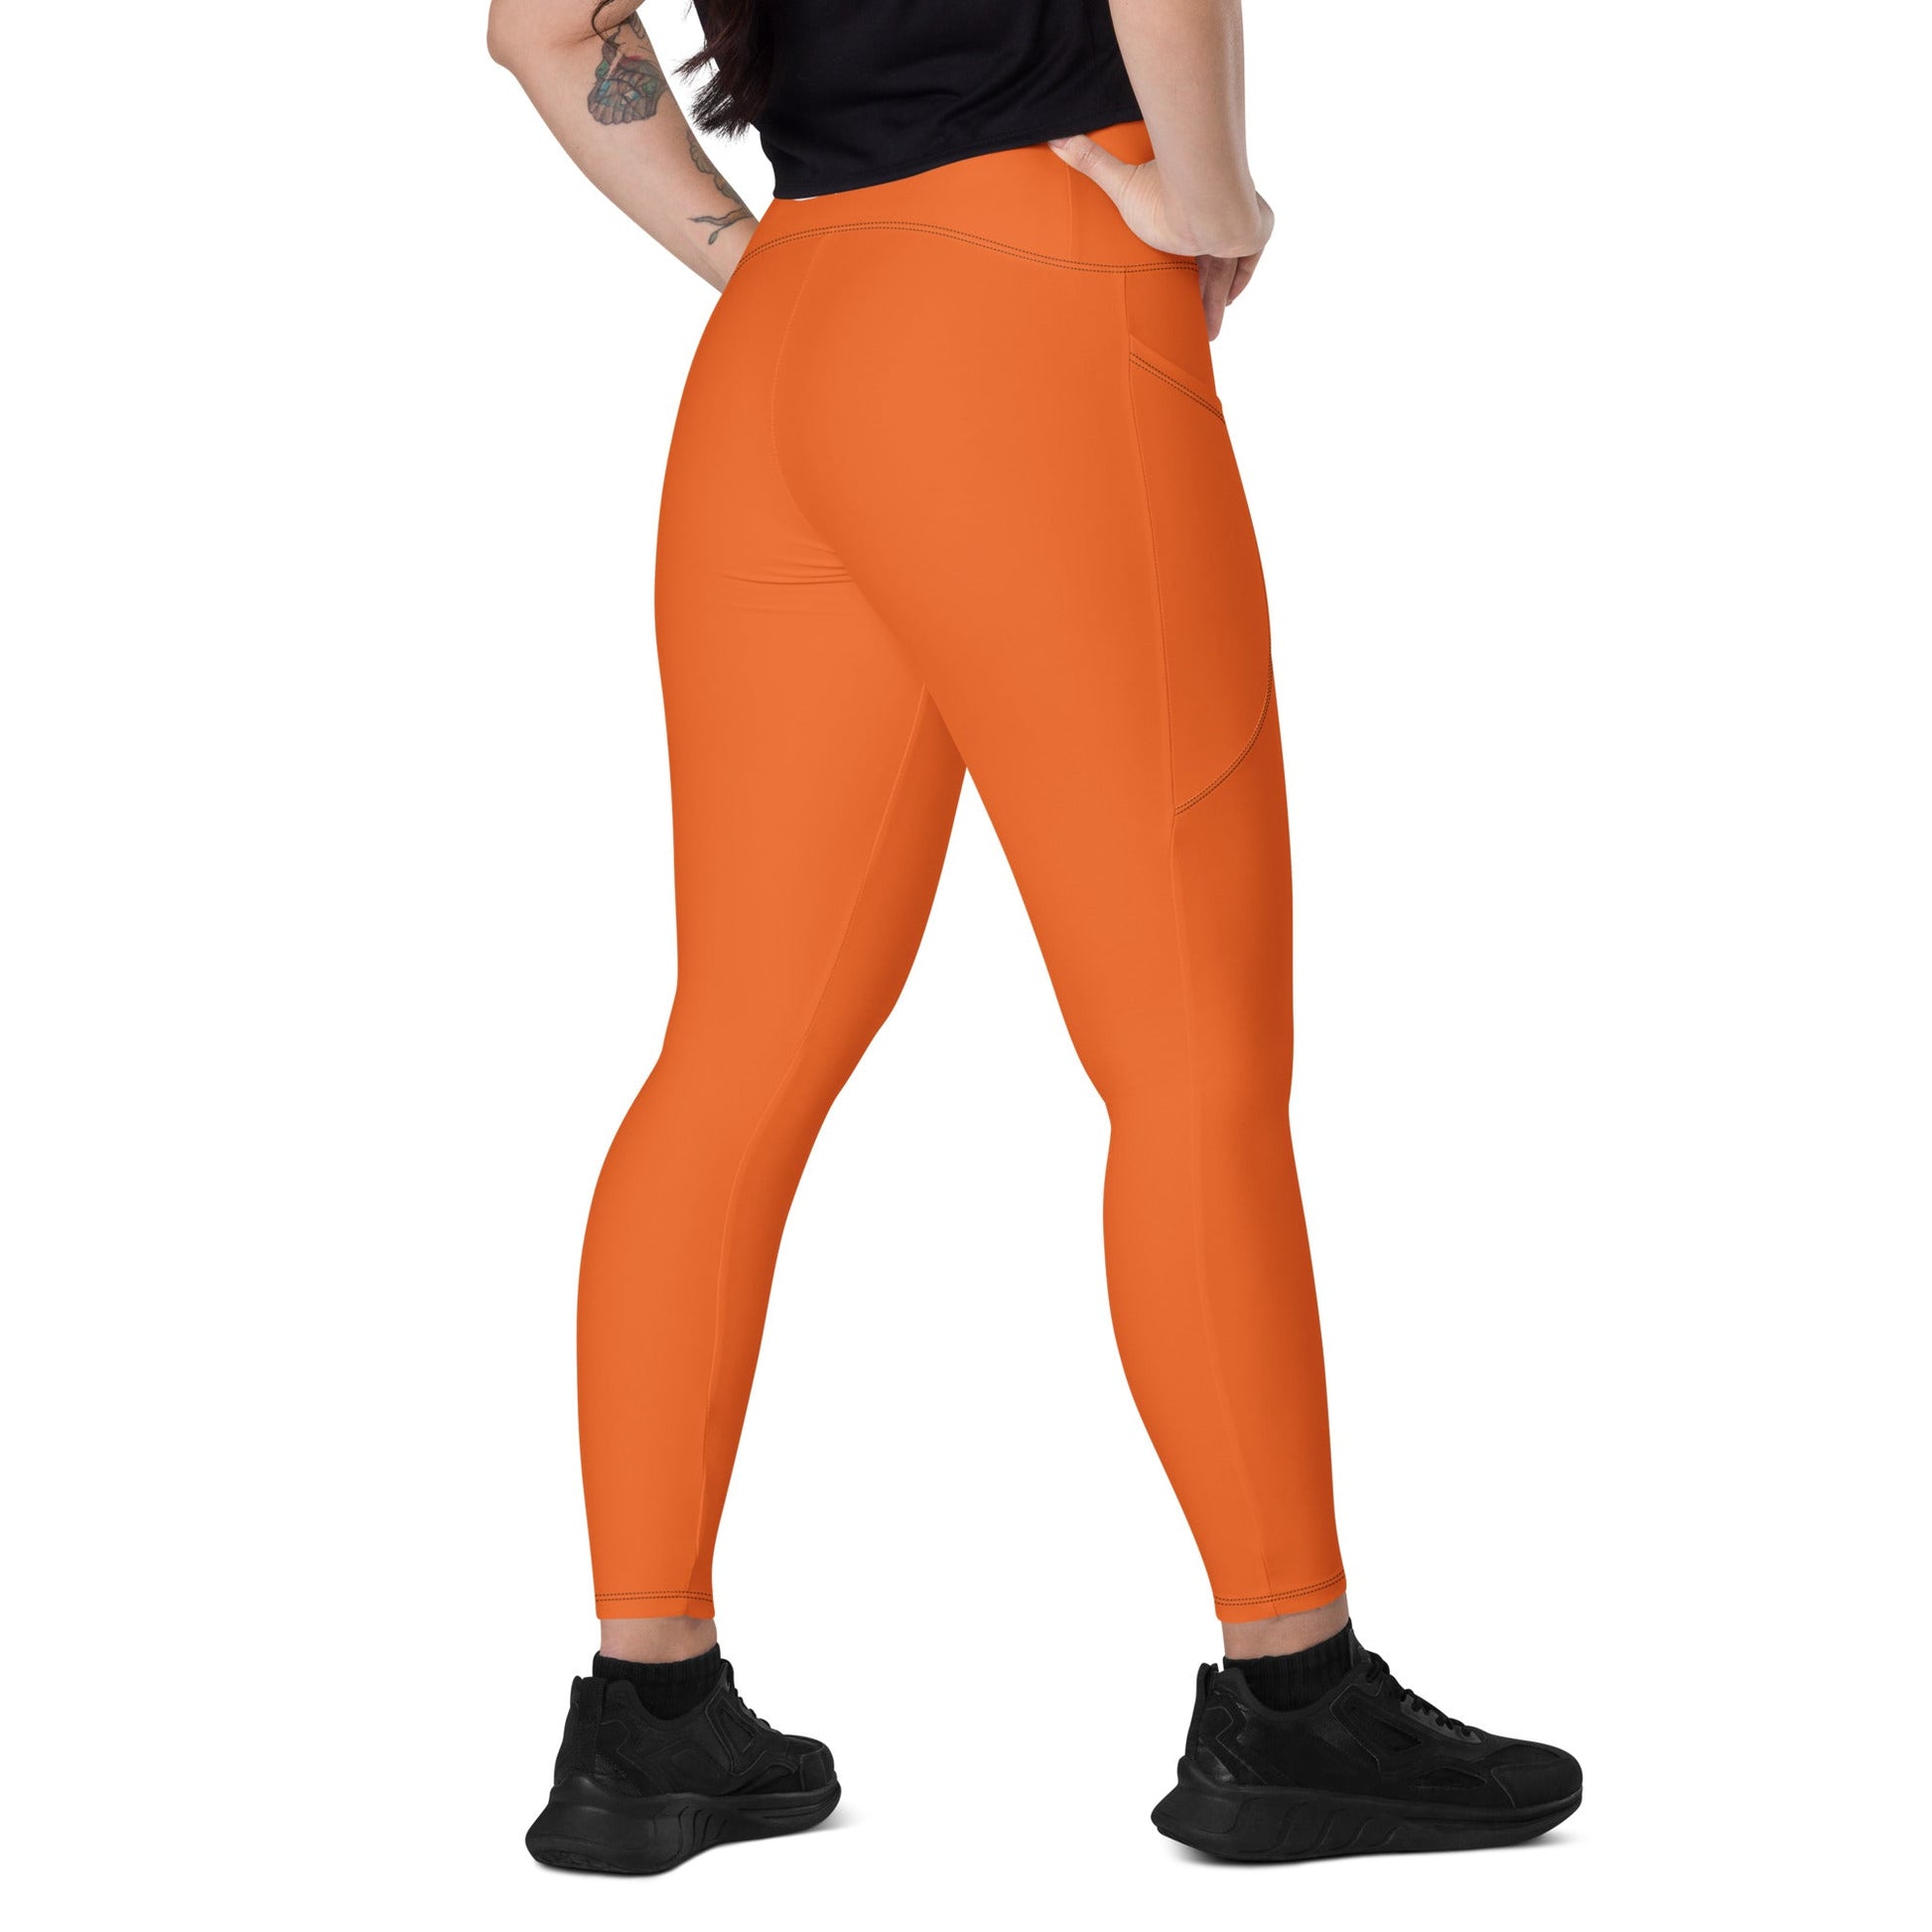 Skorched SOL Orange Crossover leggings with pockets - Sun Fun Family